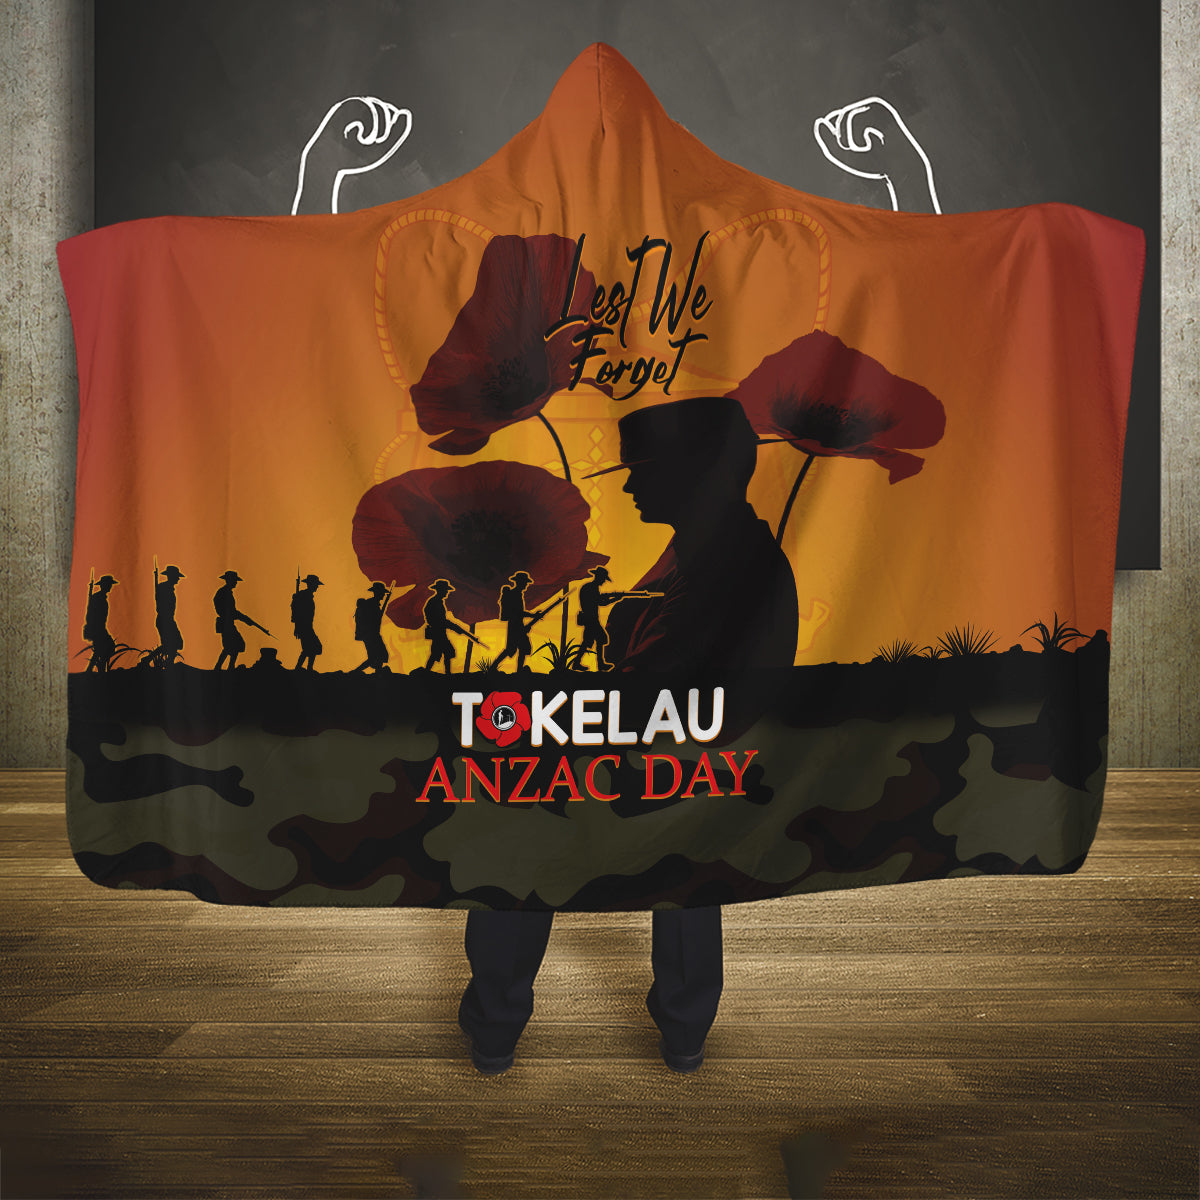 Tokelau ANZAC Day Hooded Blanket Camouflage With Poppies Lest We Forget LT14 One Size Yellow - Polynesian Pride